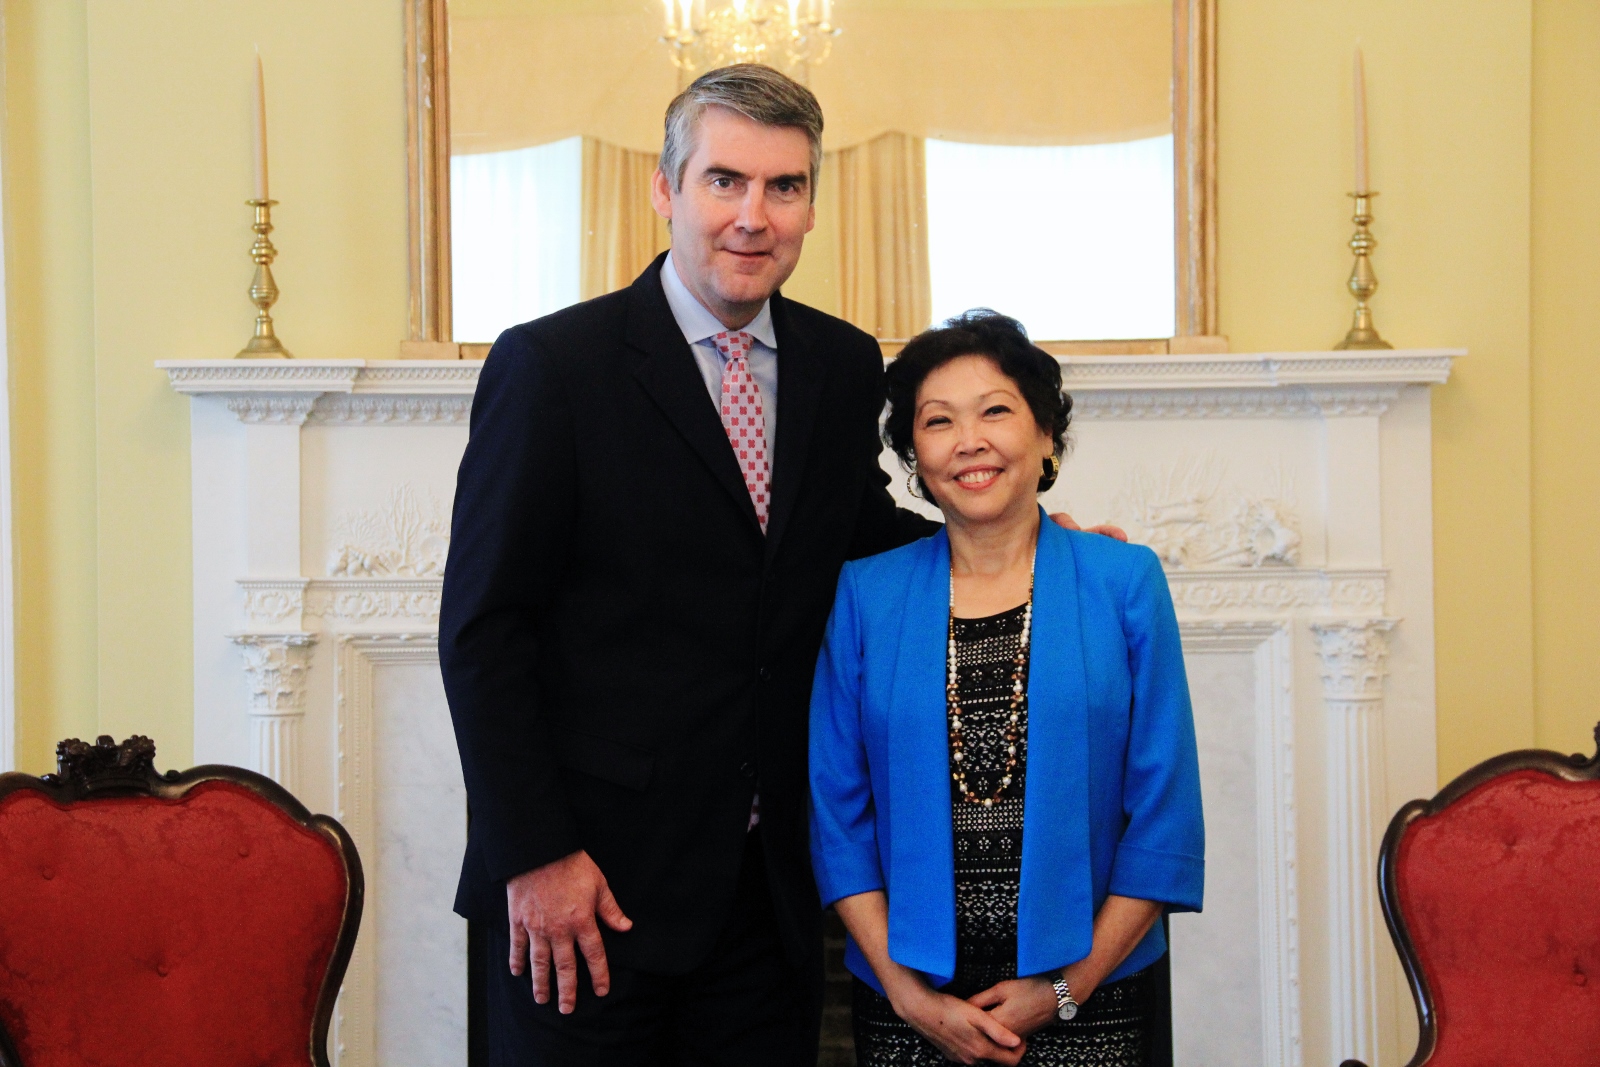 On June 7th, Premier McNeil met with Her Excellency Petronila Garcia, Ambassador of the Republic of the Philippines to Canada